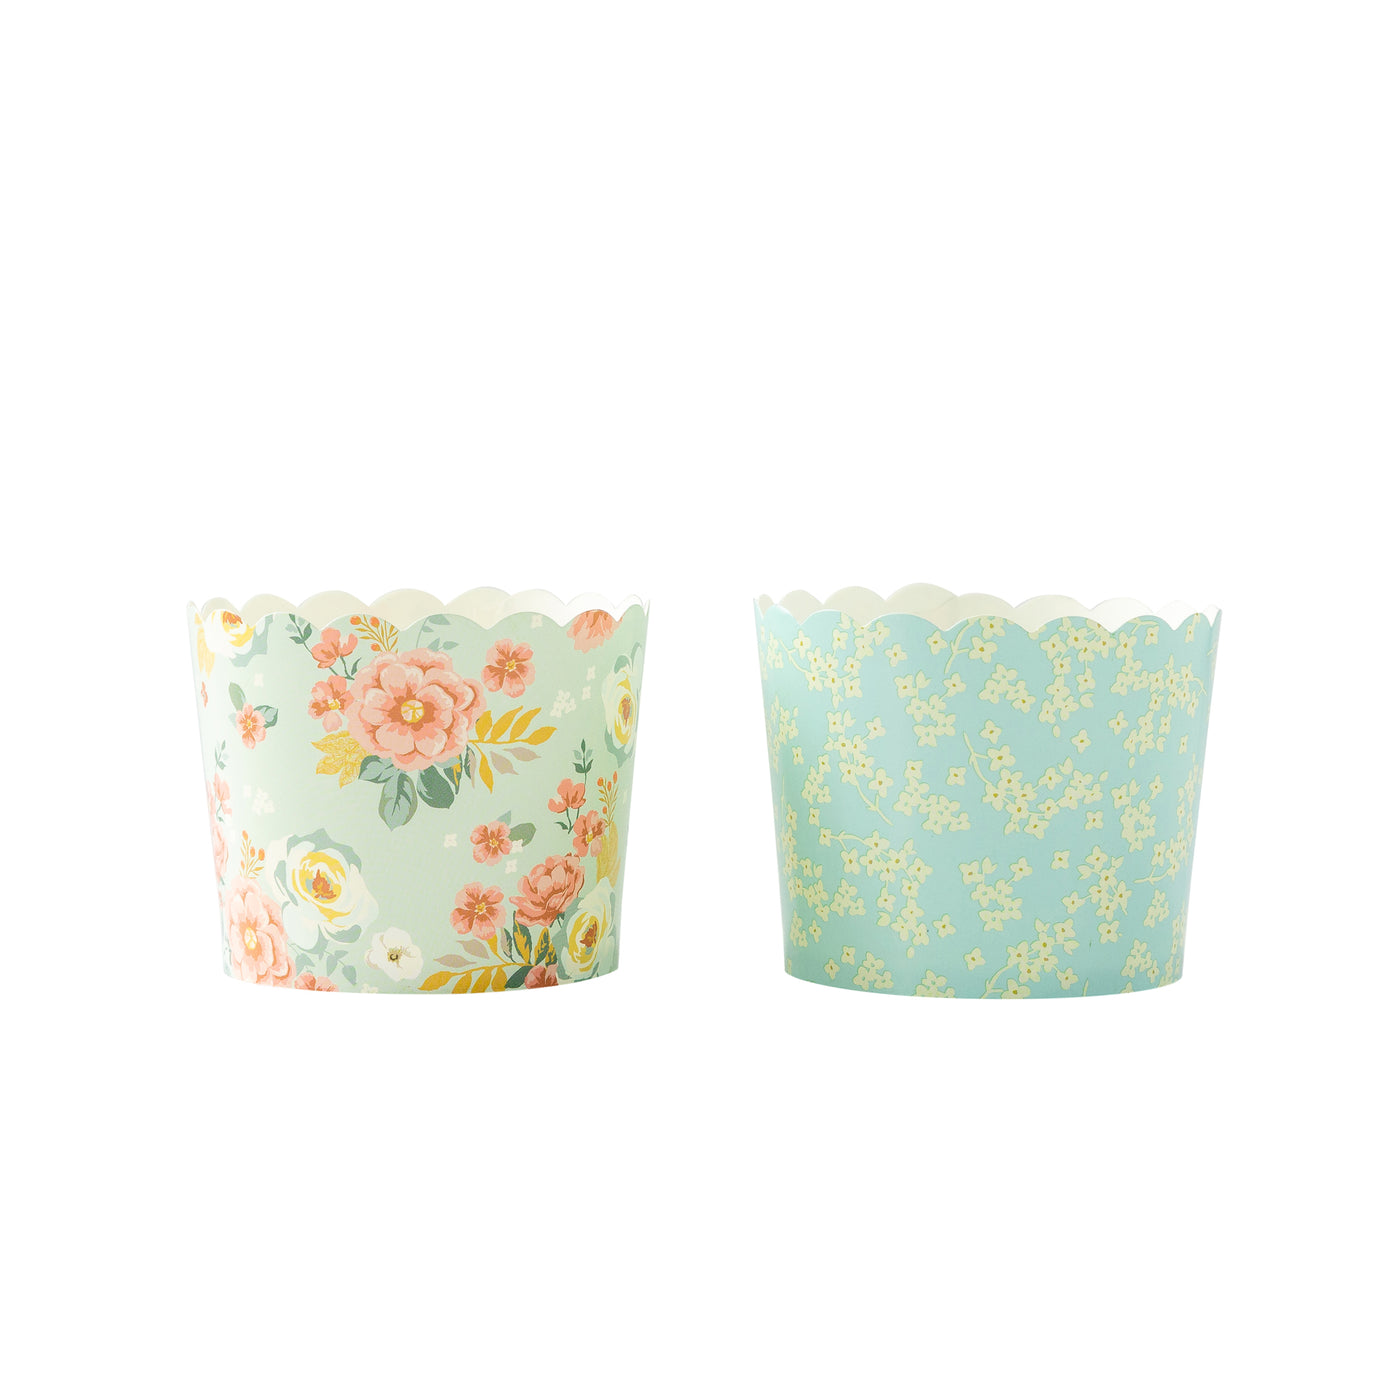 Fabric Floral Baking/Treat Cups